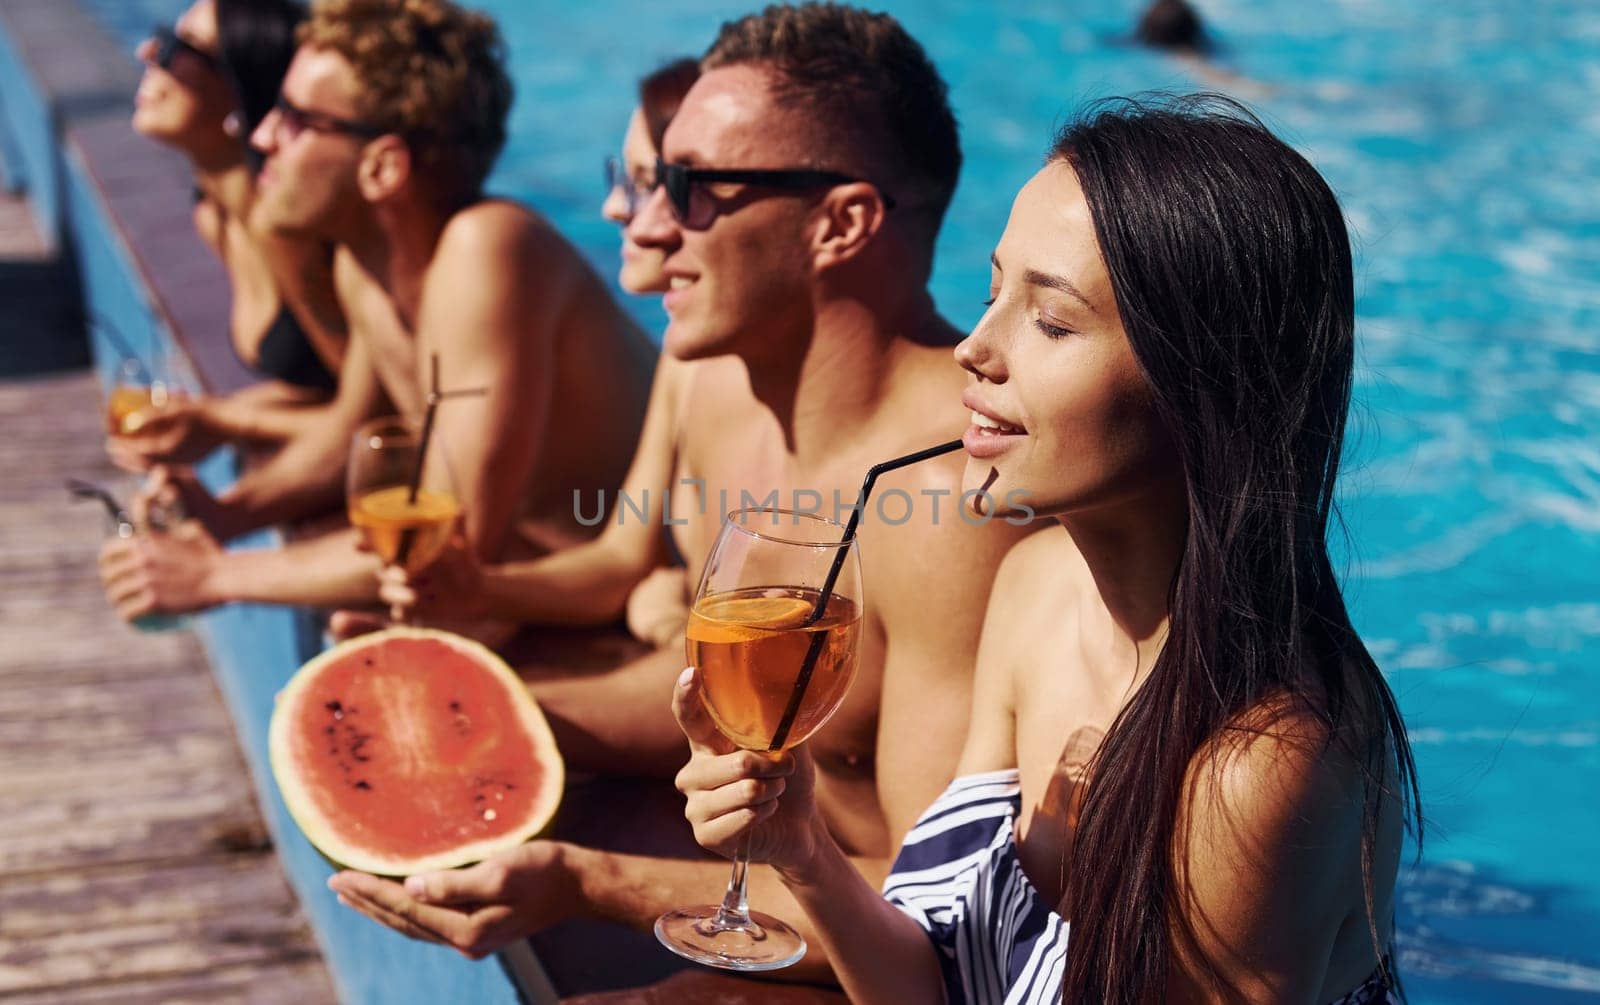 Holding watermelon. Group of young happy people have fun in swimming pool at daytime.